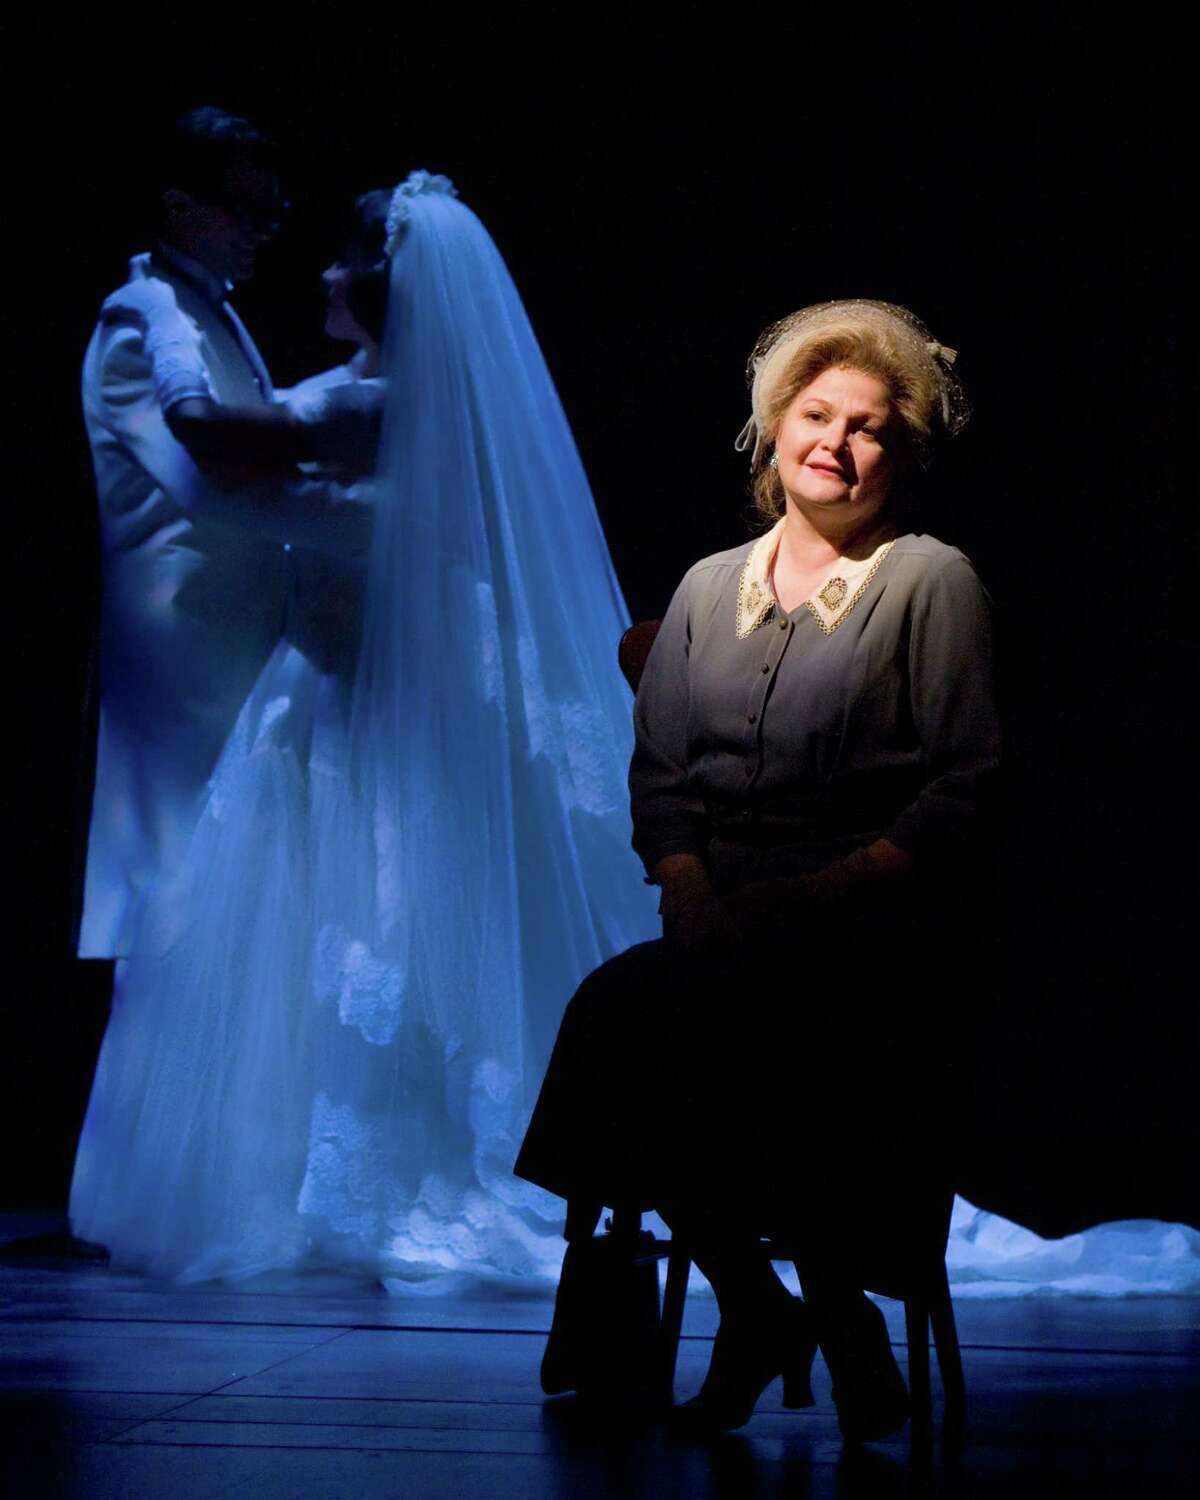 Tony-winning Broadway star Faith Prince will be performing as part of the International Cabaret Conference at Yale University starting Saturday, July 28. Here she is seen in the musical "A Catered Affair."